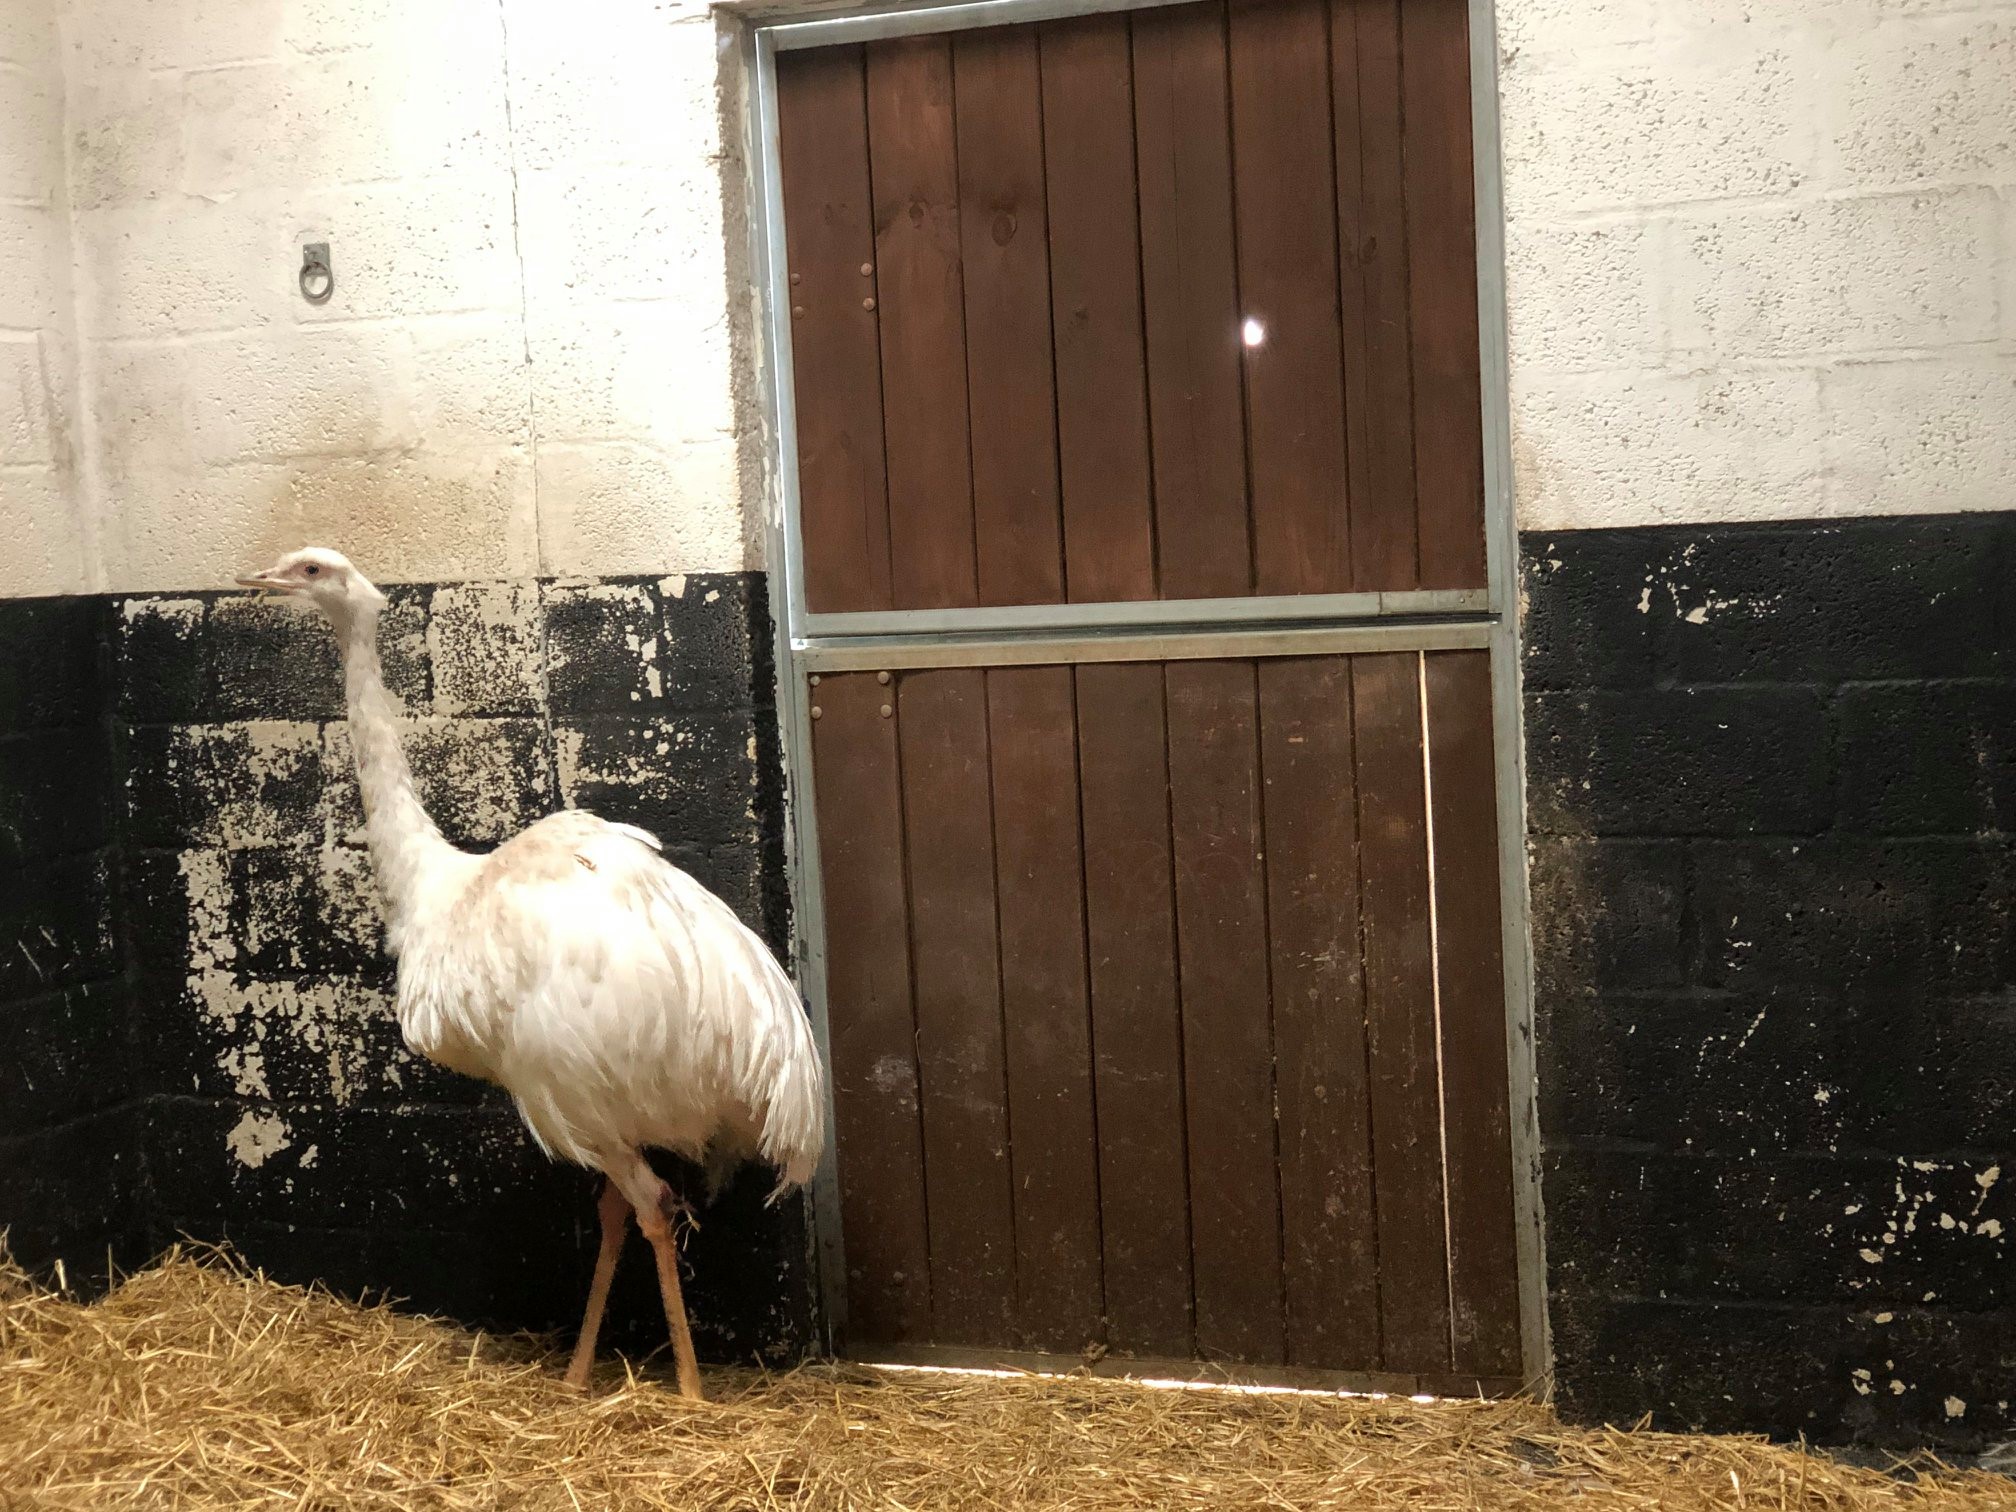 Picture of the rhea submitted by the Scottish SPCA.